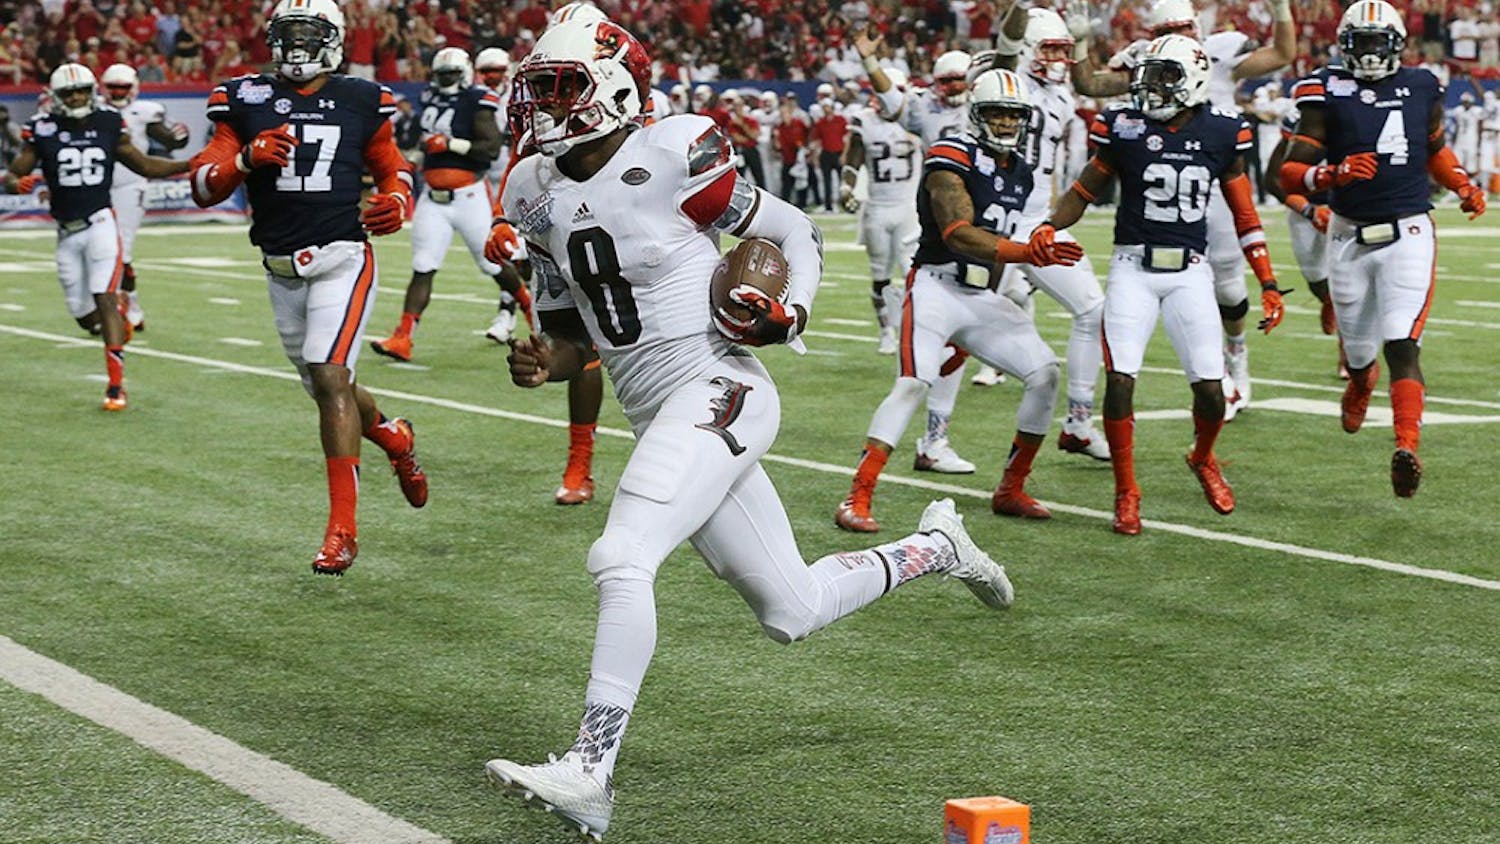 Louisville quarterback Lamar Jackson runs for a touchdown against Auburn defenders to cut the Auburn lead to 24-10 during the third quarter in the Chick-fil-A Kickoff Game on Saturday, Sept. 5, 2015, in Atlanta. Auburn won 31-24. (Curtis Compton/Atlanta Journal-Constitution/TNS) 